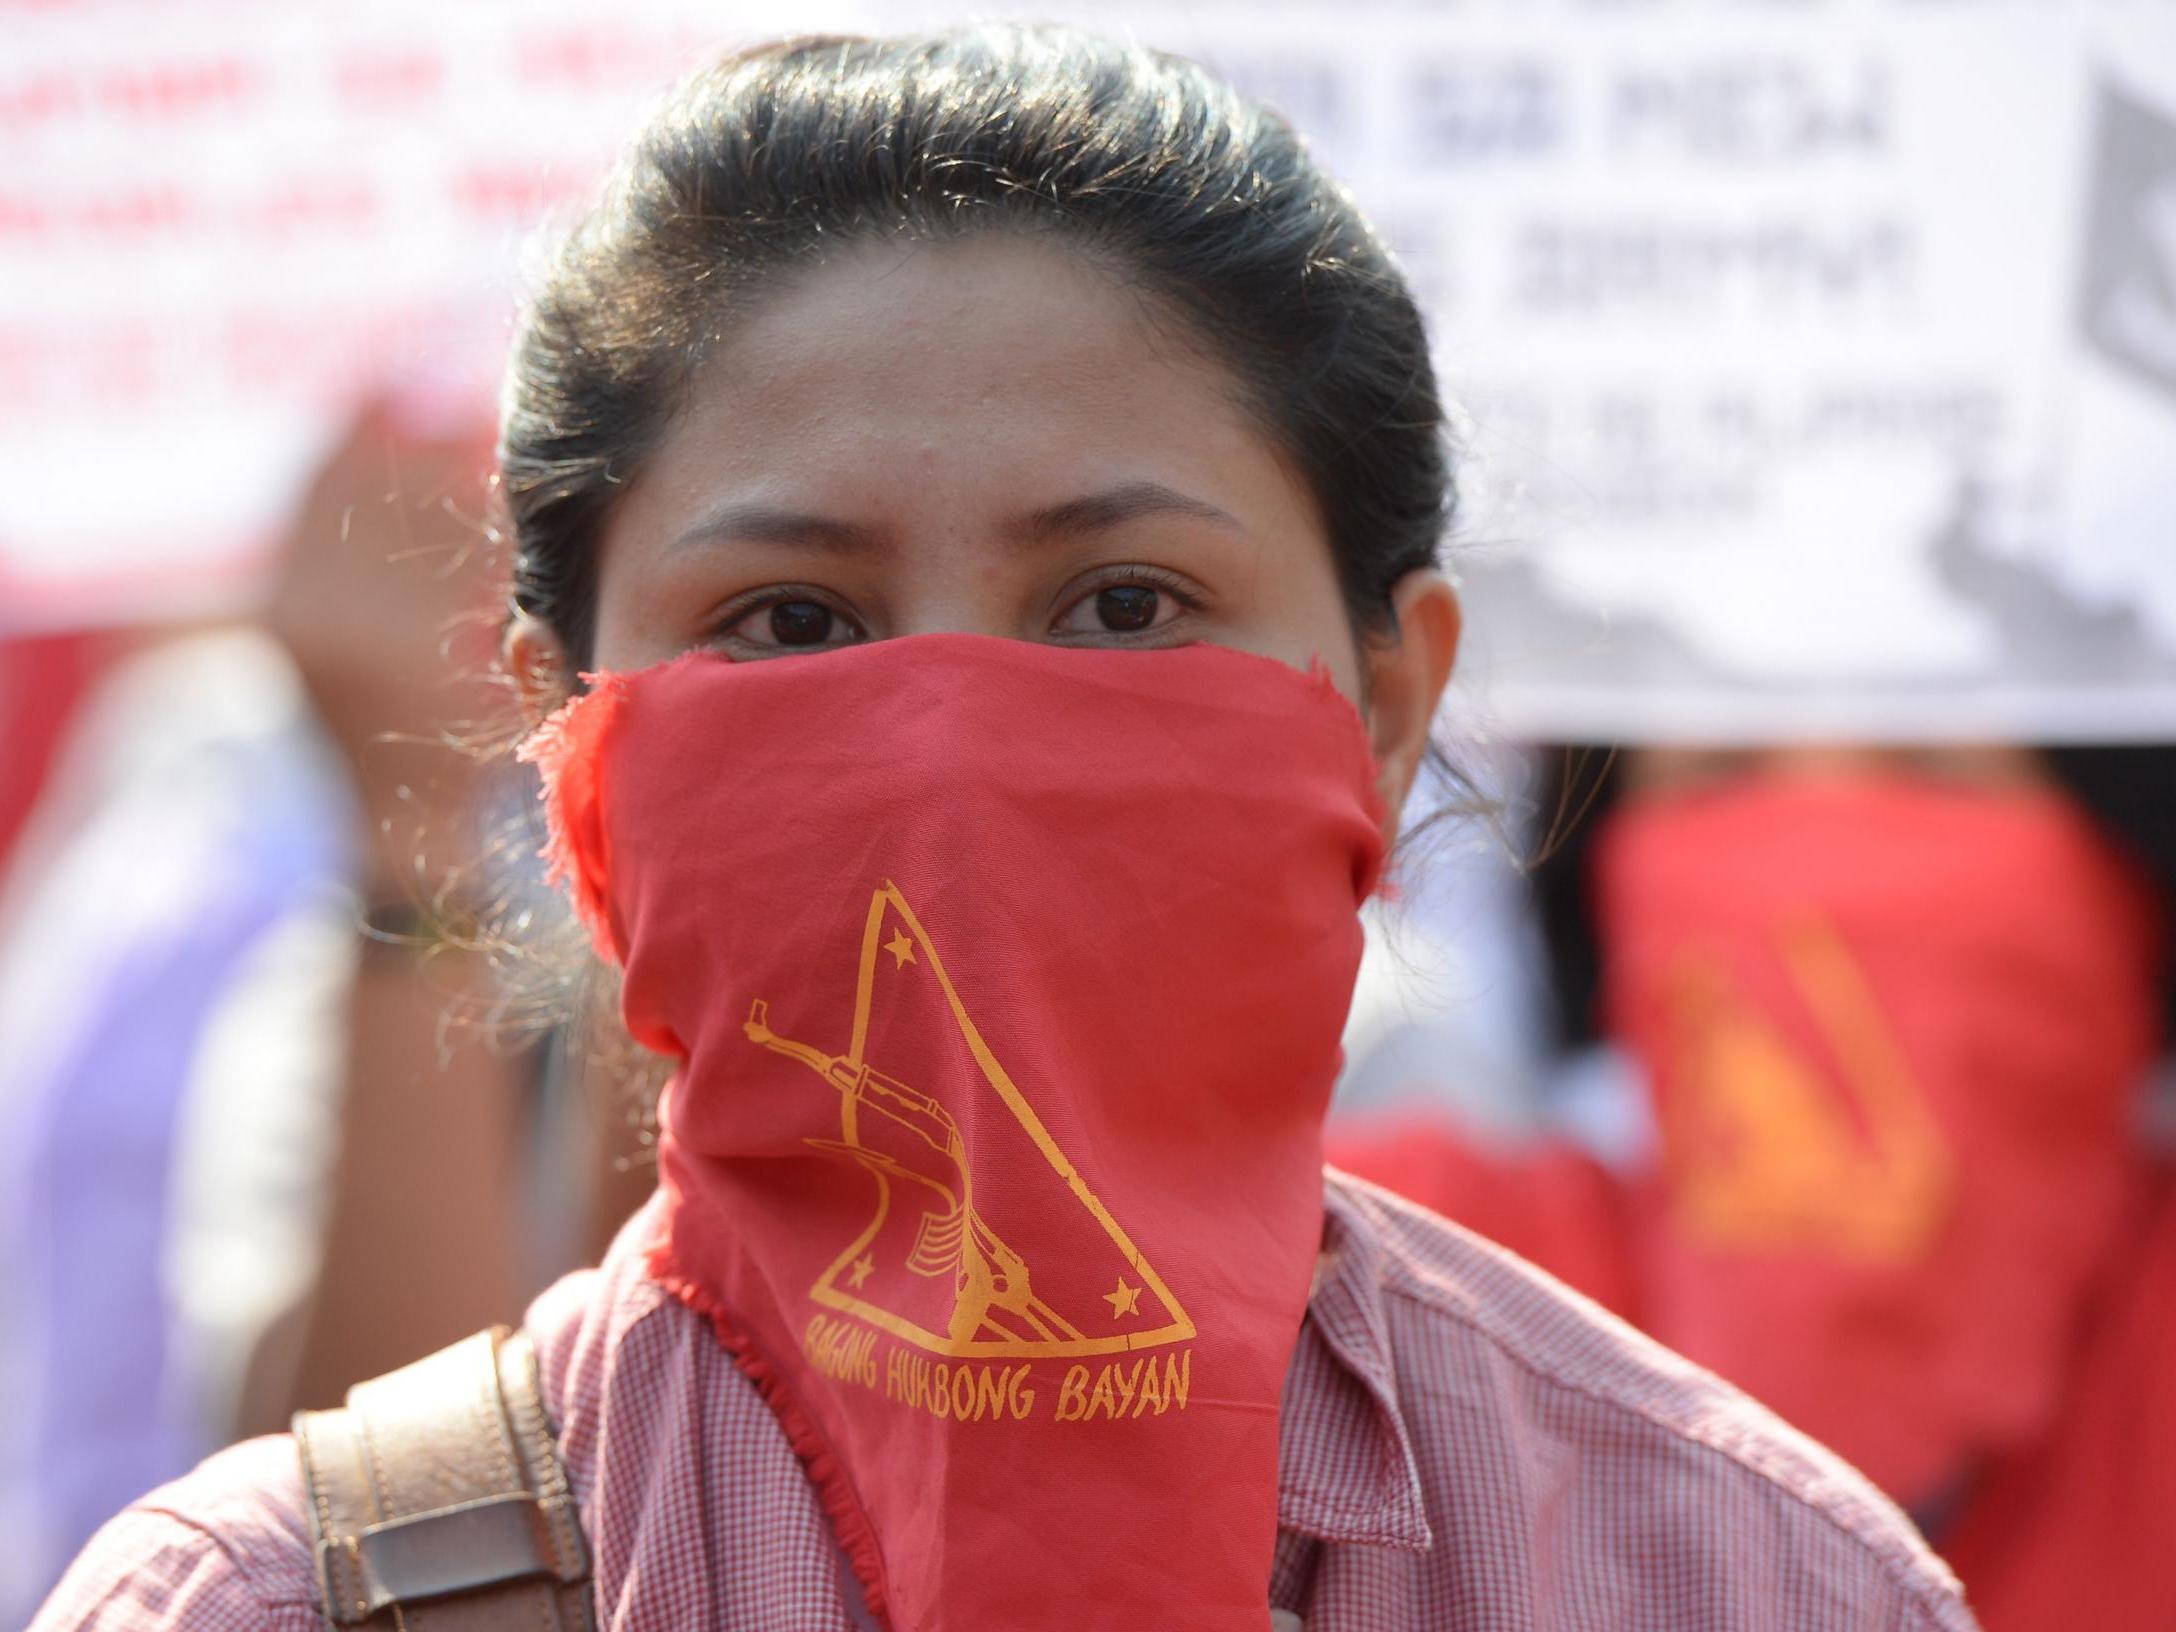 Supporters of the communist party of the Philippines’ armed group, the New People’s Army (NPA) with their faces covered march toward the peace arch for a protest near Malacanang Palace in Manila on 31 March 2017 (Ted Aljibe /